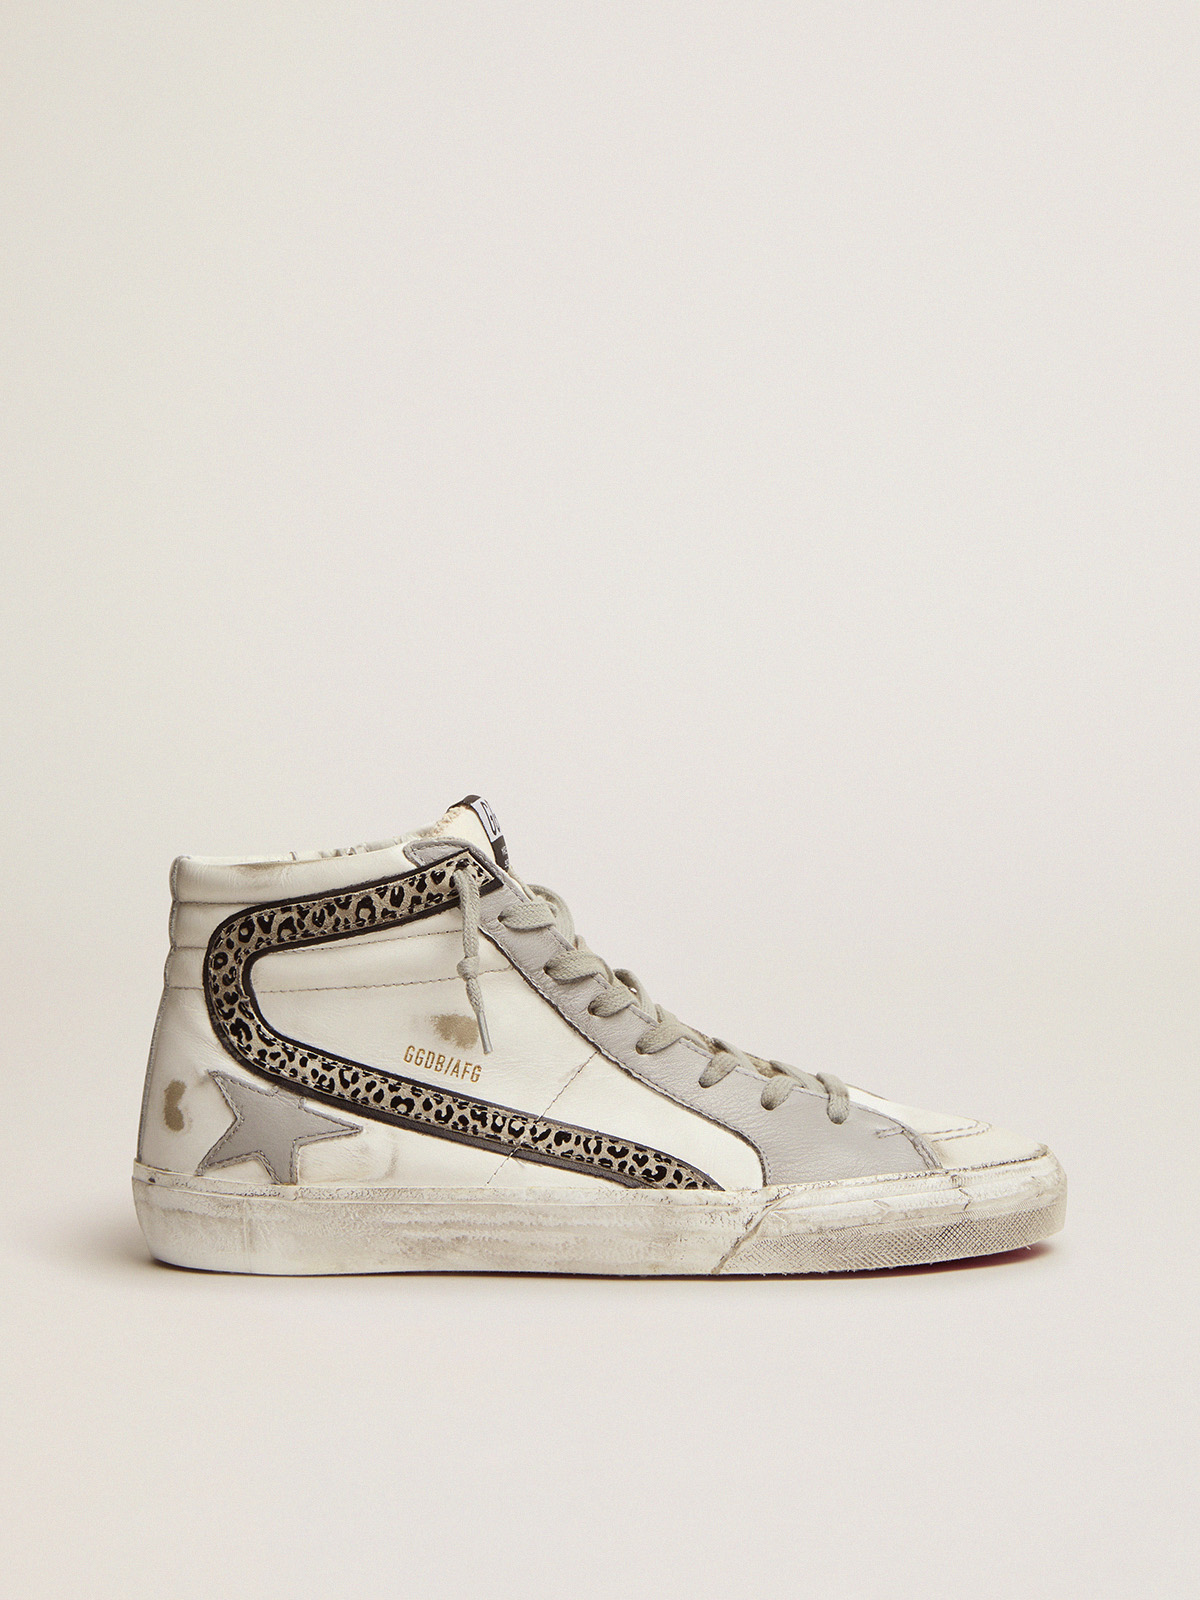 Slide sneakers with white leather upper and animal-print suede flash |  Golden Goose